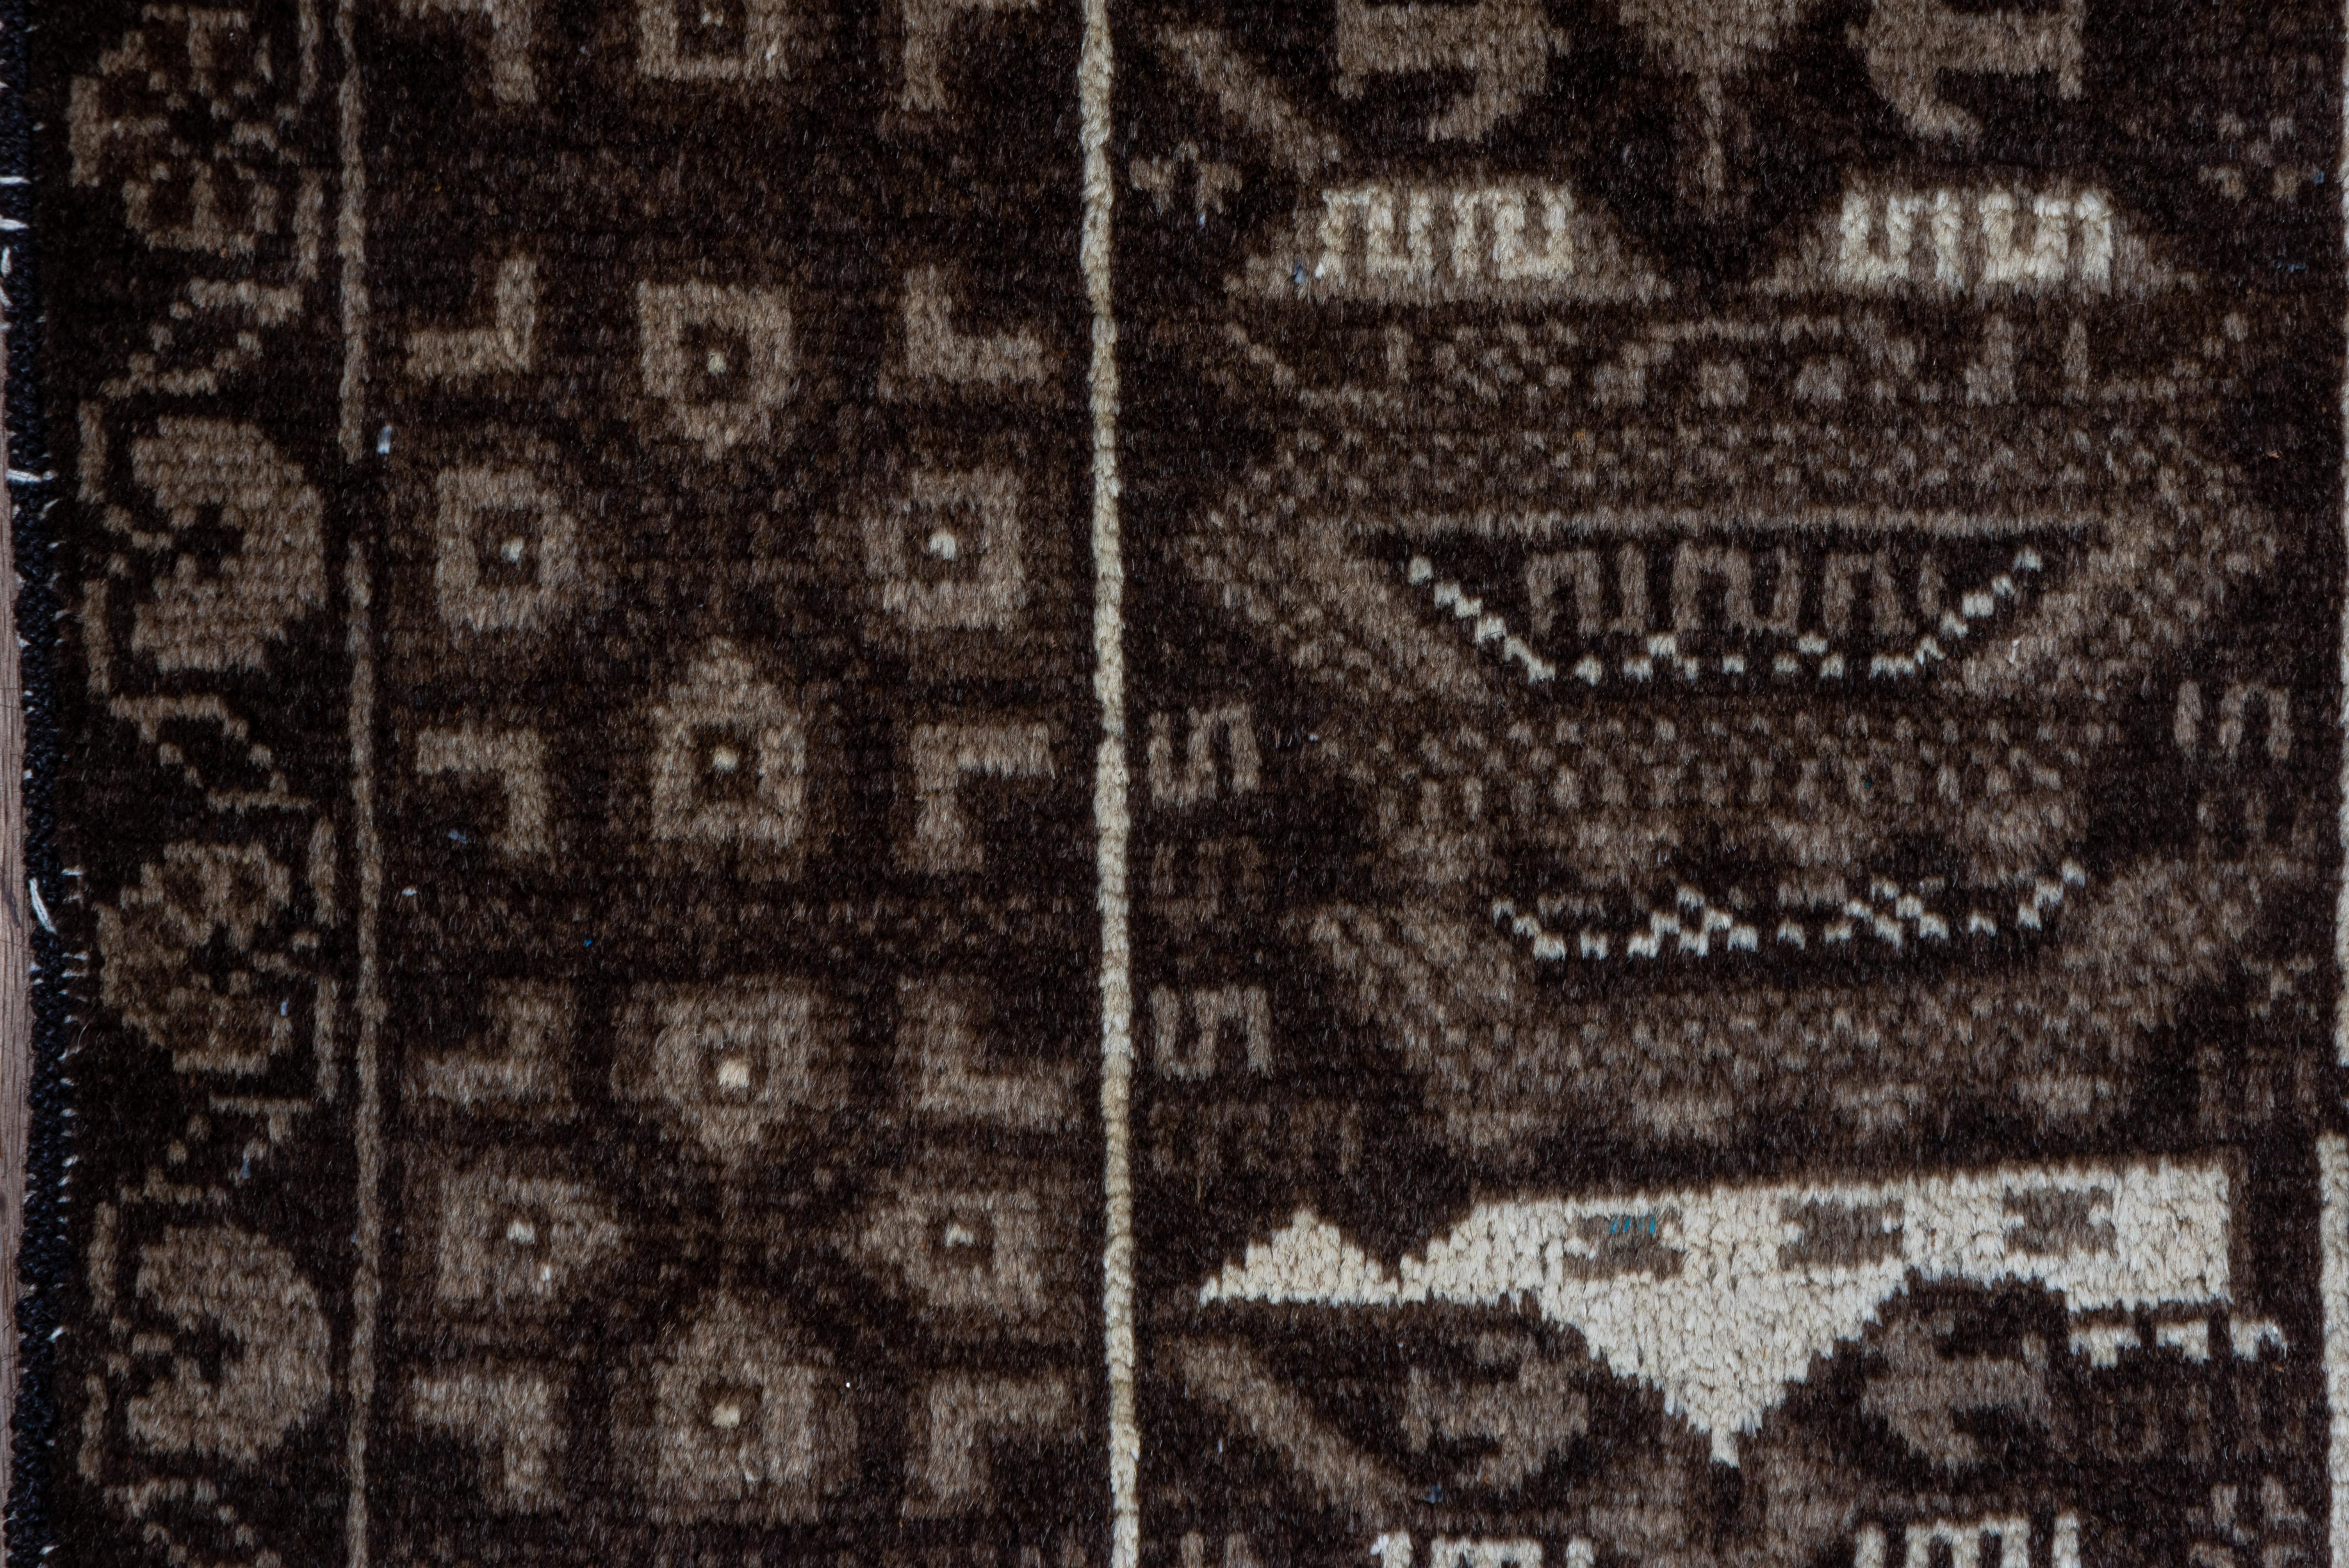 Mid-20th Century Tribal Belouch Scatter Rug, Dark Espresso Brown Field, Gray and White Accents For Sale